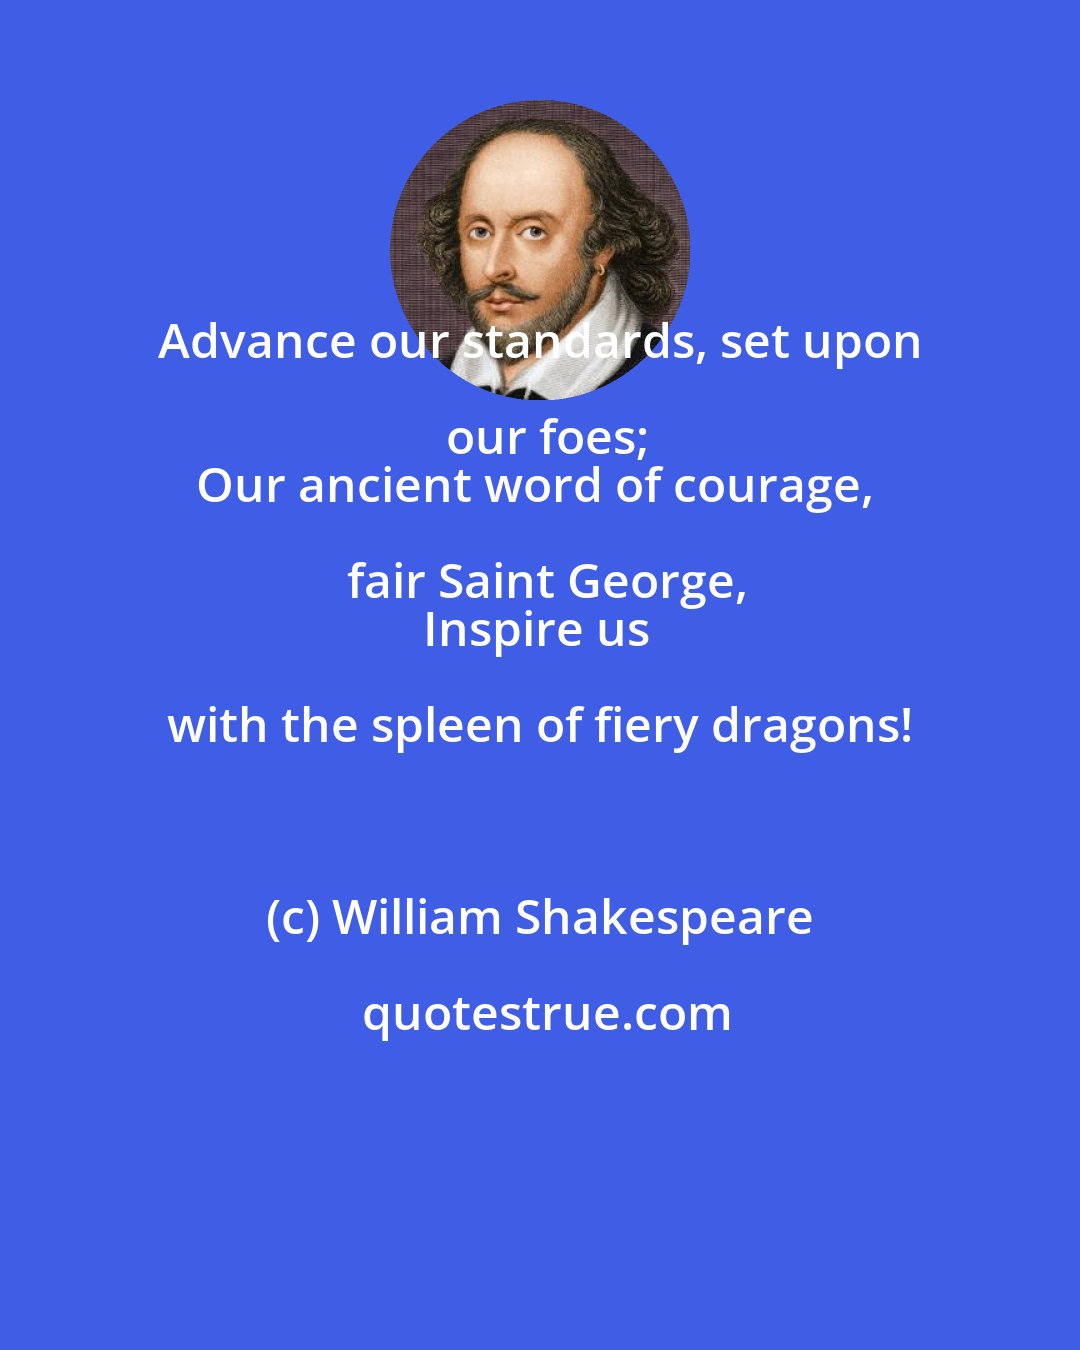 William Shakespeare: Advance our standards, set upon our foes;
Our ancient word of courage, fair Saint George,
Inspire us with the spleen of fiery dragons!